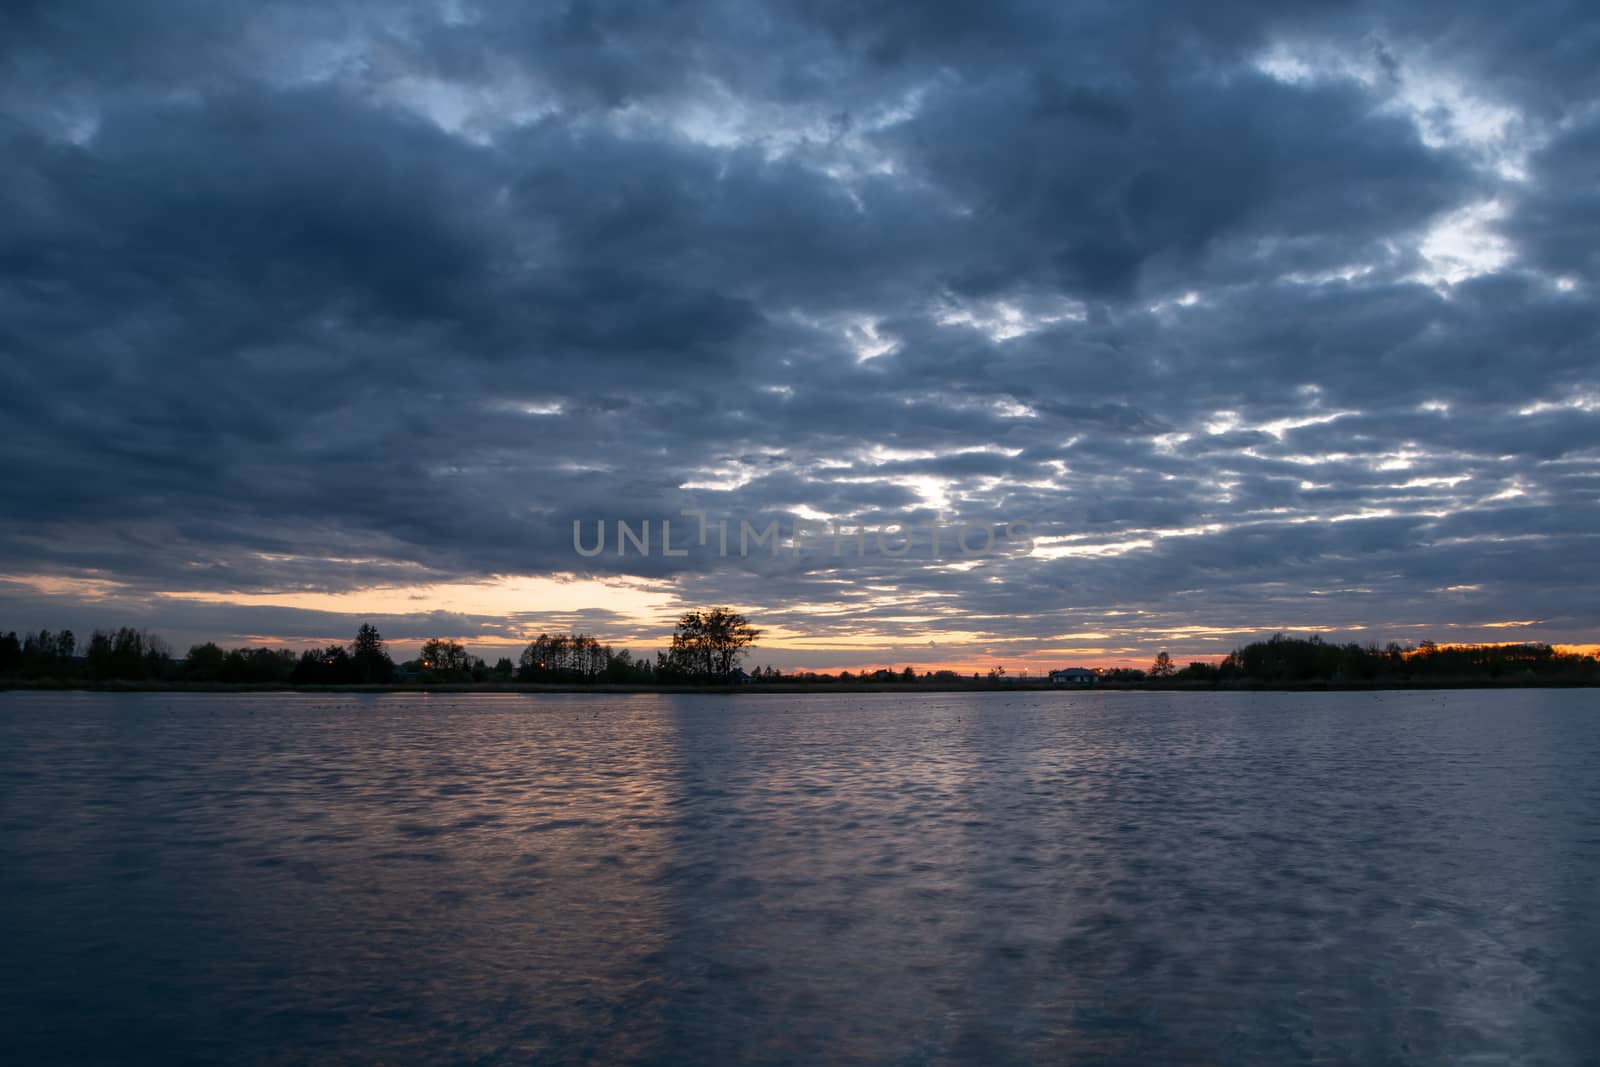 View of the lake and clouds after sunset, long exposure time